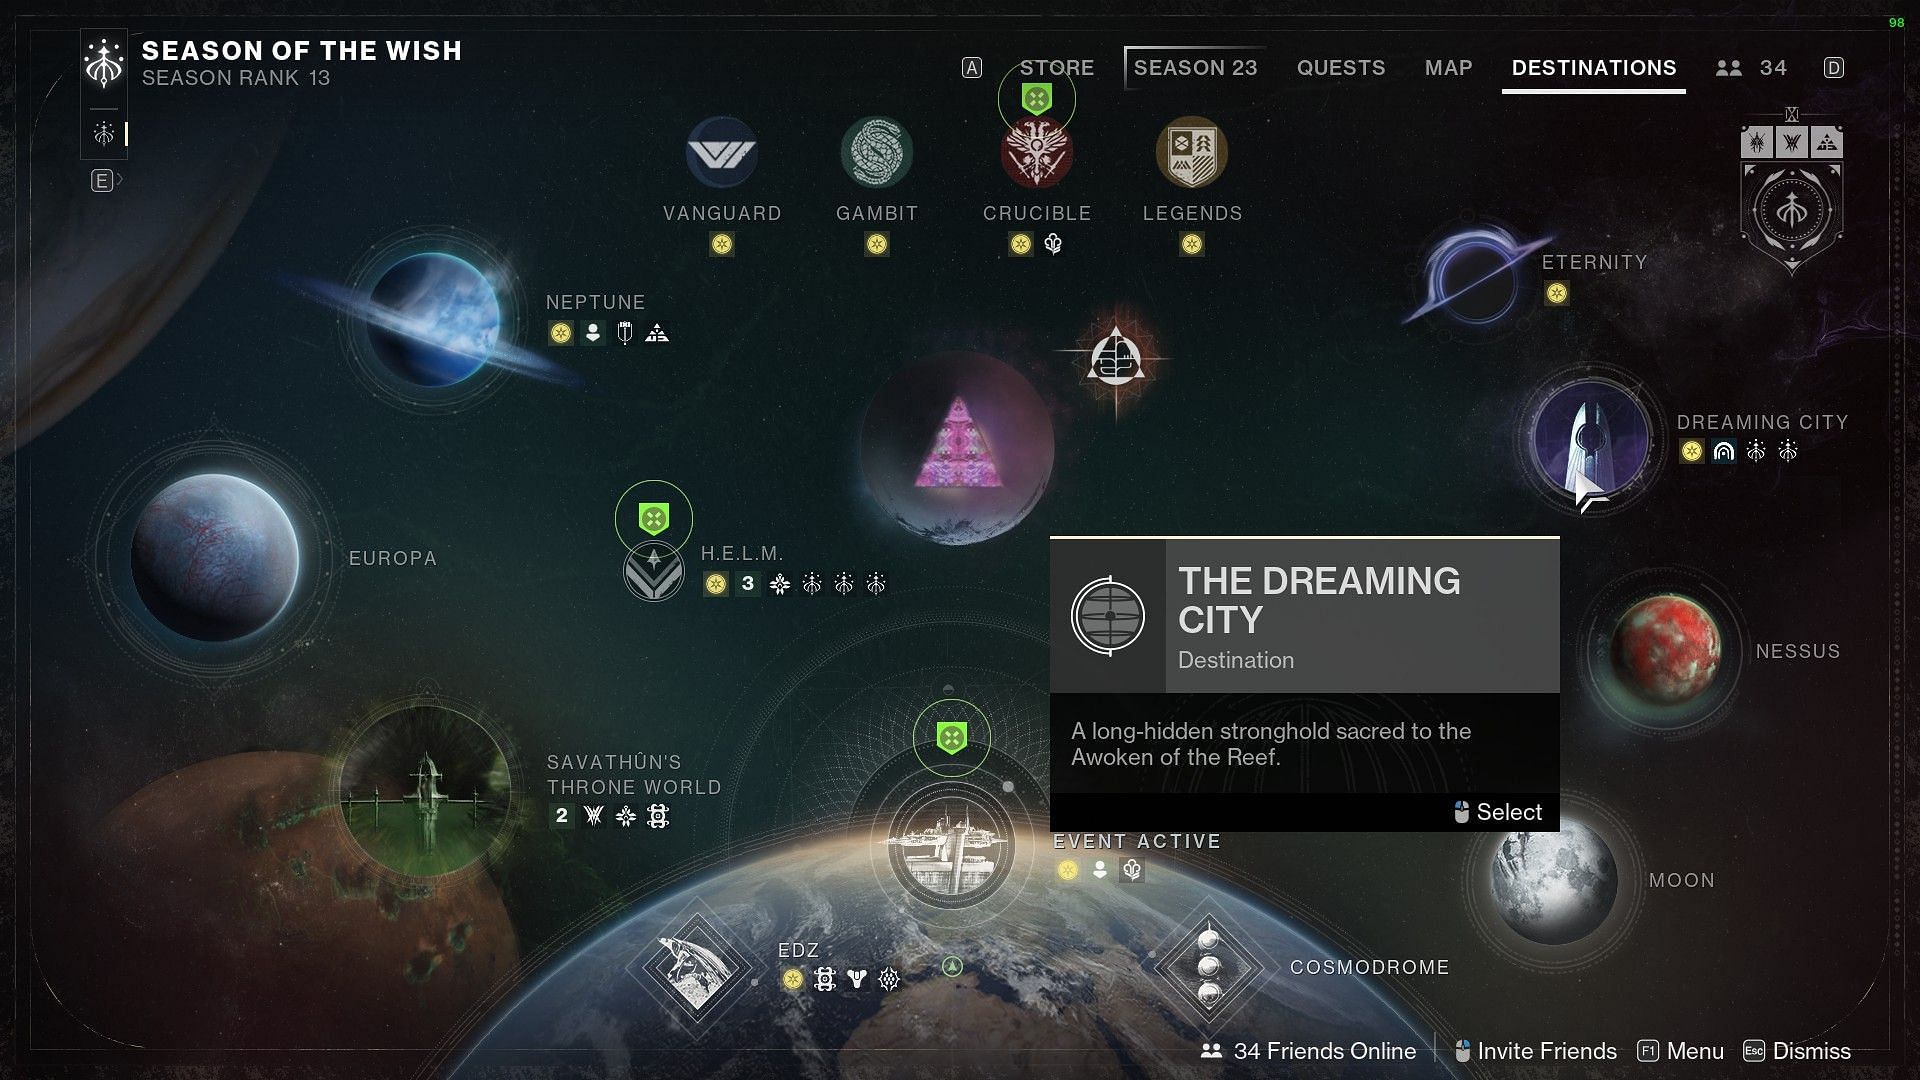 Destiny 2 Lost Sector icon on The Dreaming City (Image via Bungie)